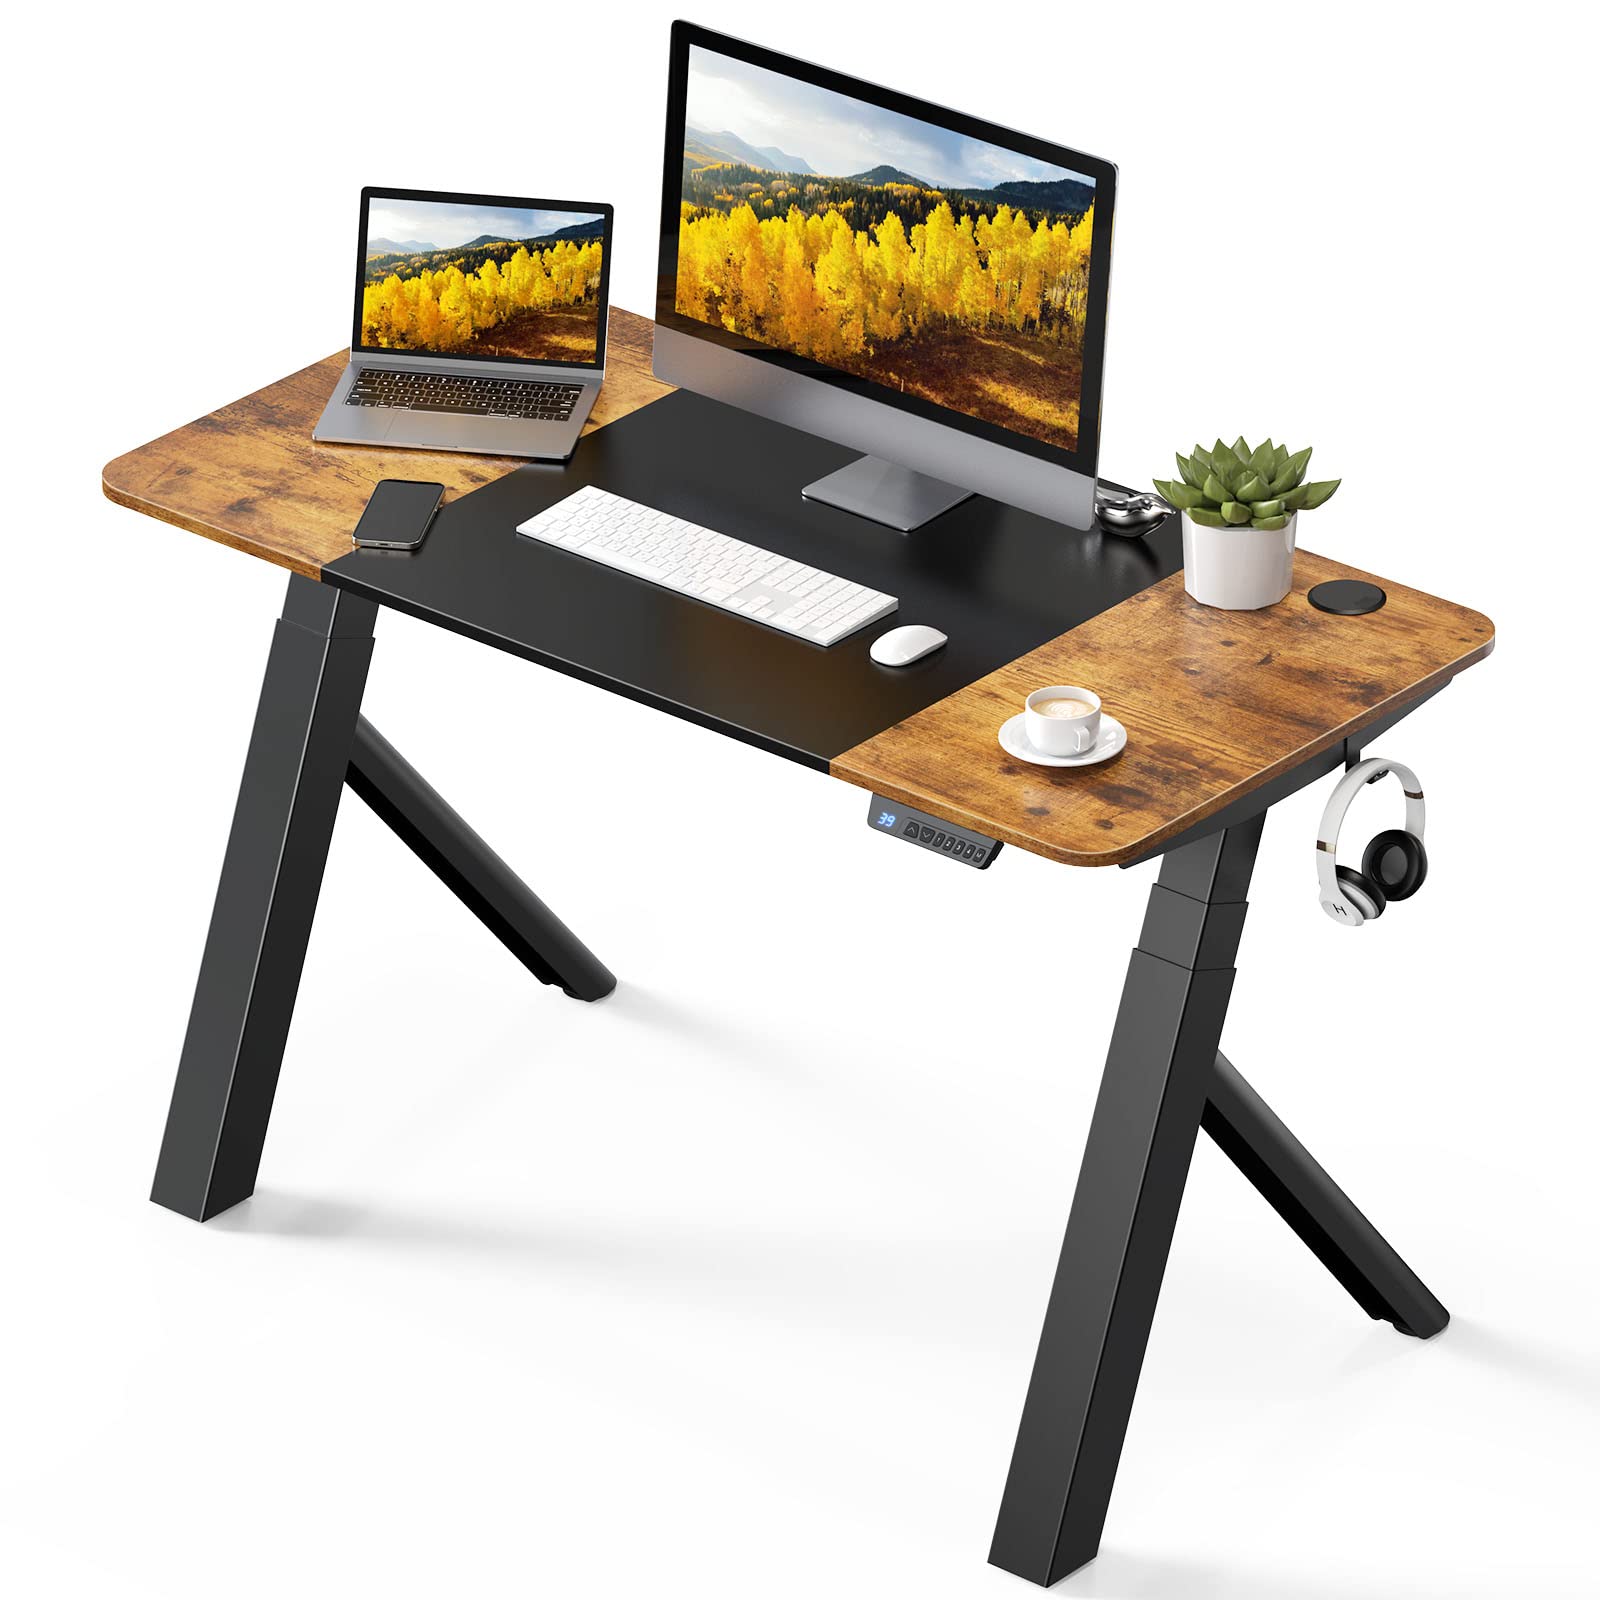 HOUSEELF Electric Standing Desk 48" x 24" - Dual Motor Stable Wood Top Sit-Stand Desk with Stable Triangular Structure, 23-46in Adjustable ...